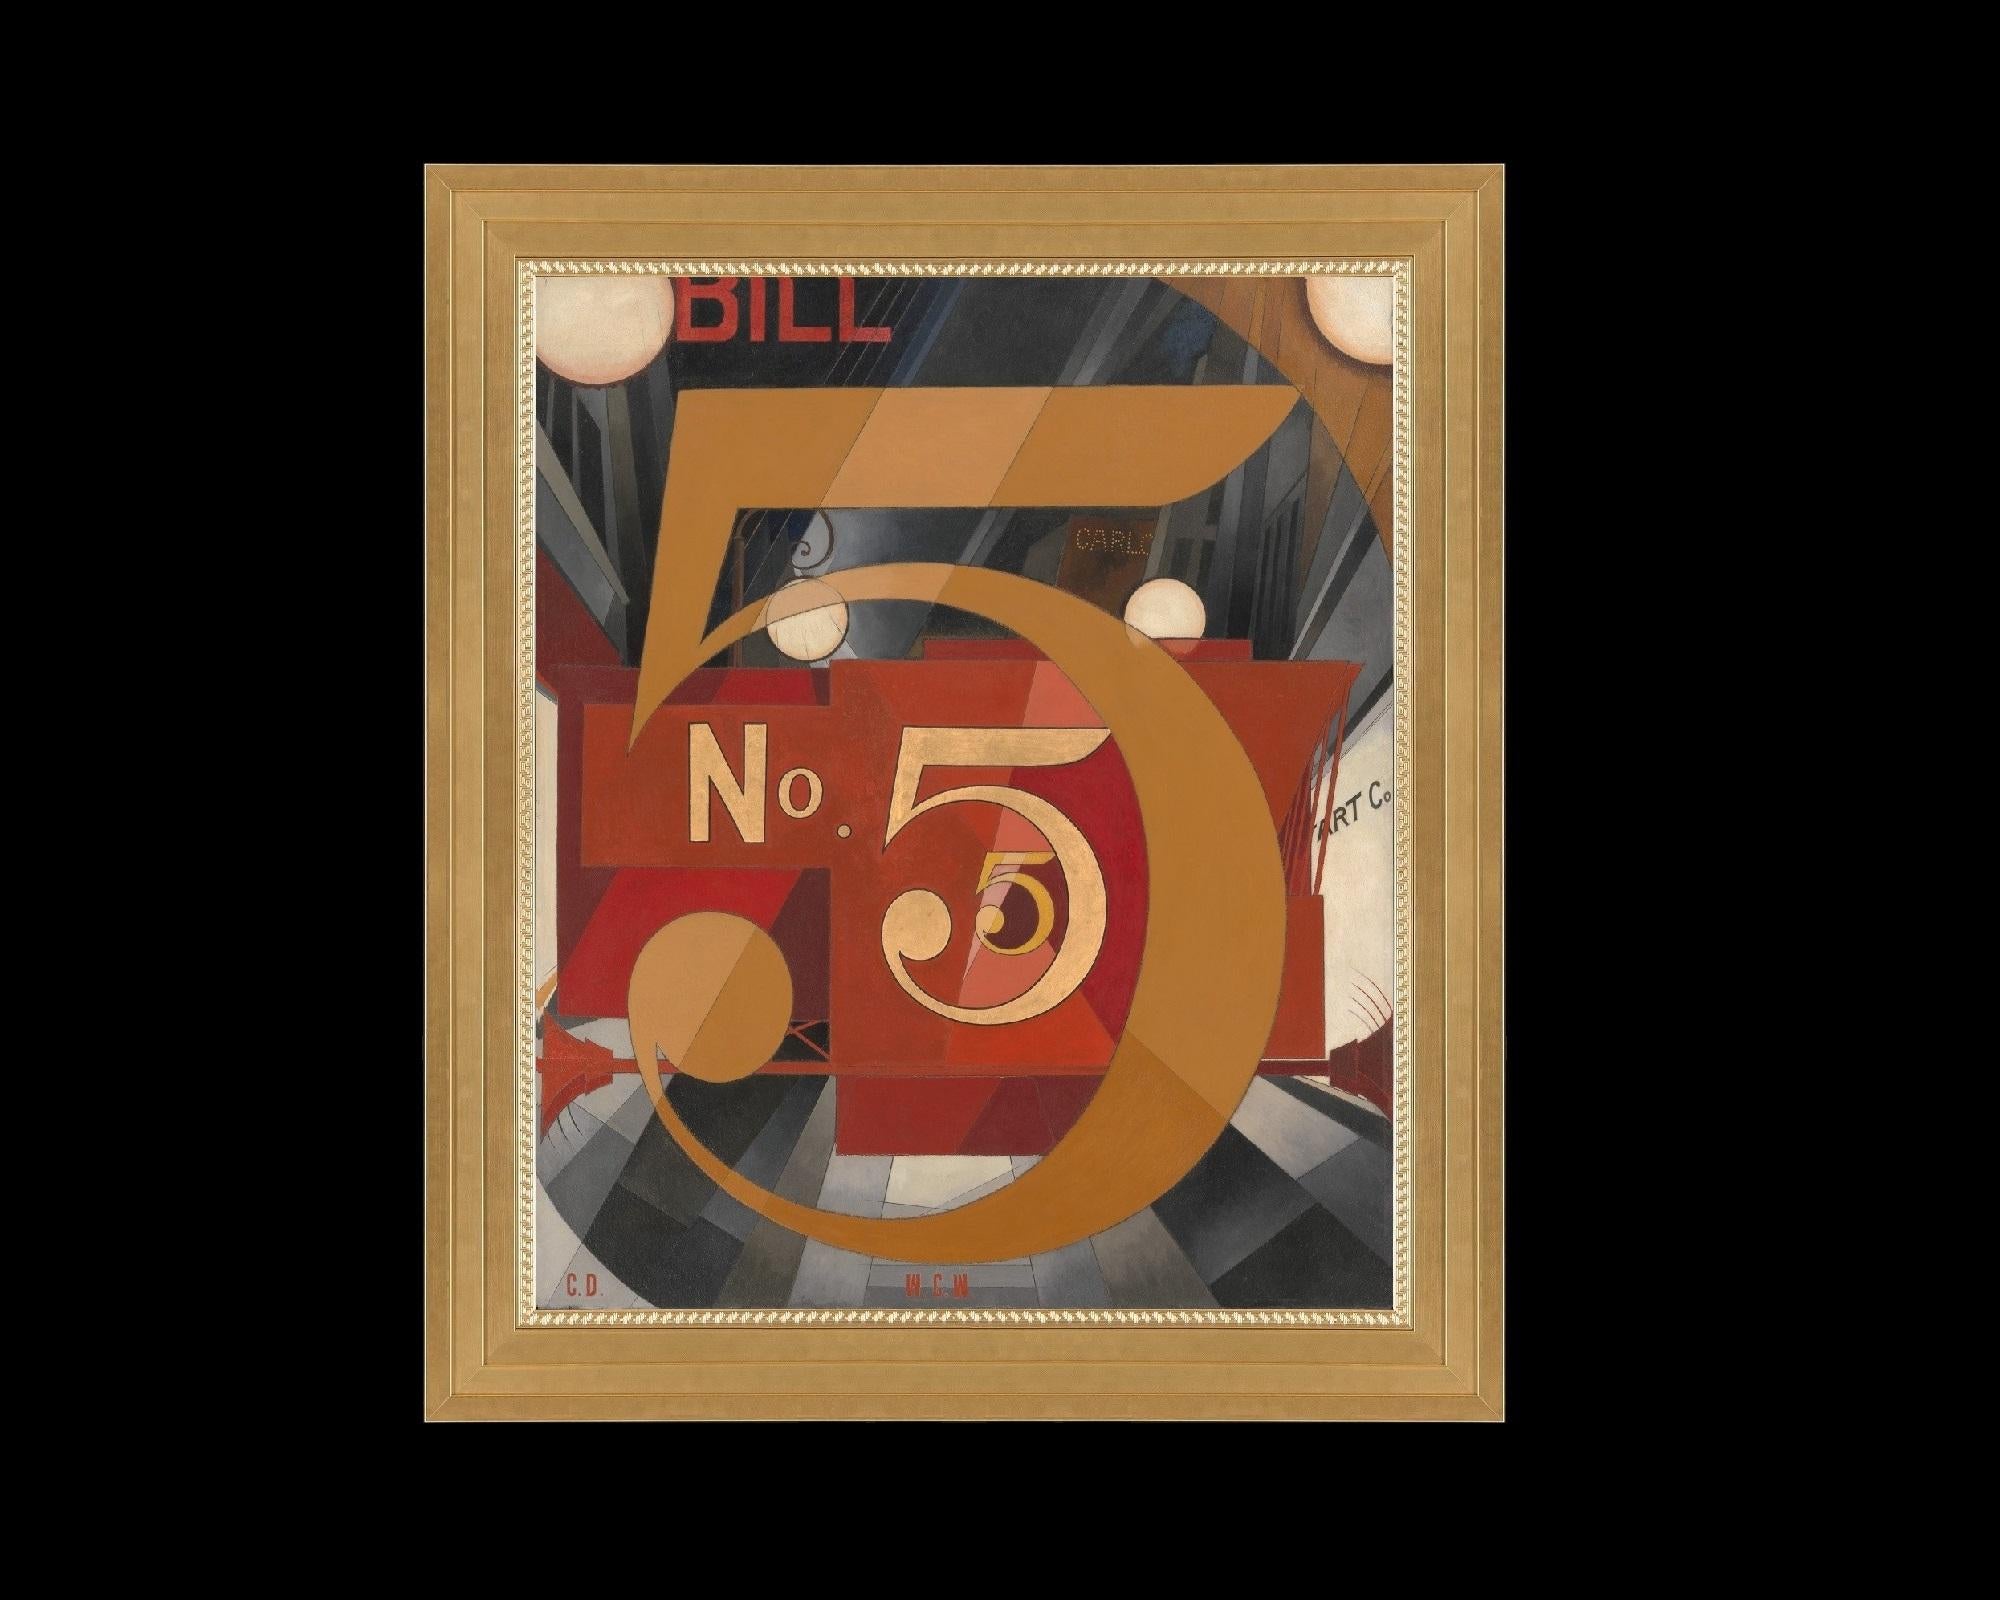 This large Fine Art masterpiece is a faithful yet nuanced reproduction of a vintage Art Deco poster titled 